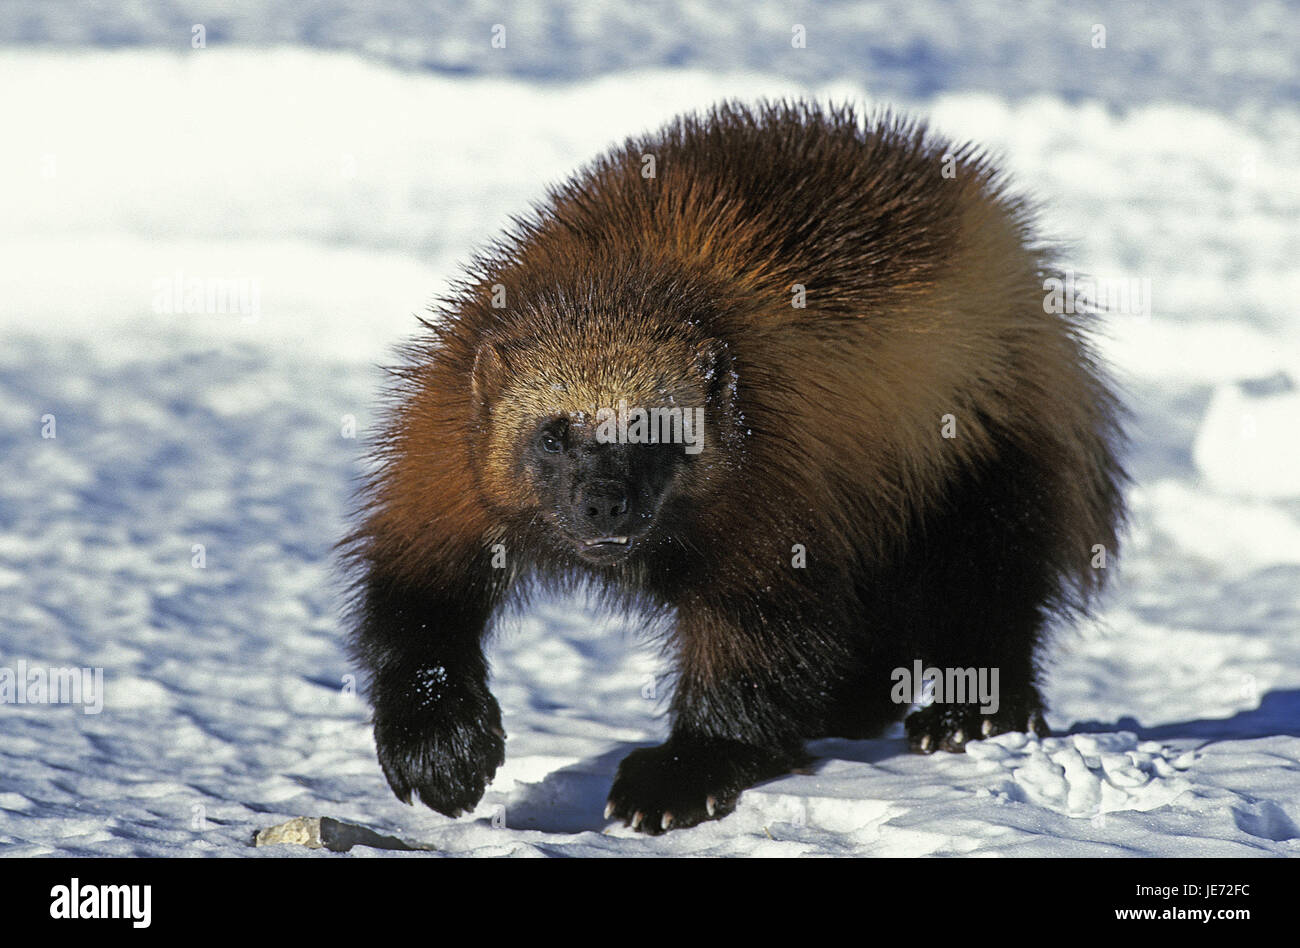 North American wolverine, Gulo gulo luscus, adult animal, stand, snow, Canada, Stock Photo